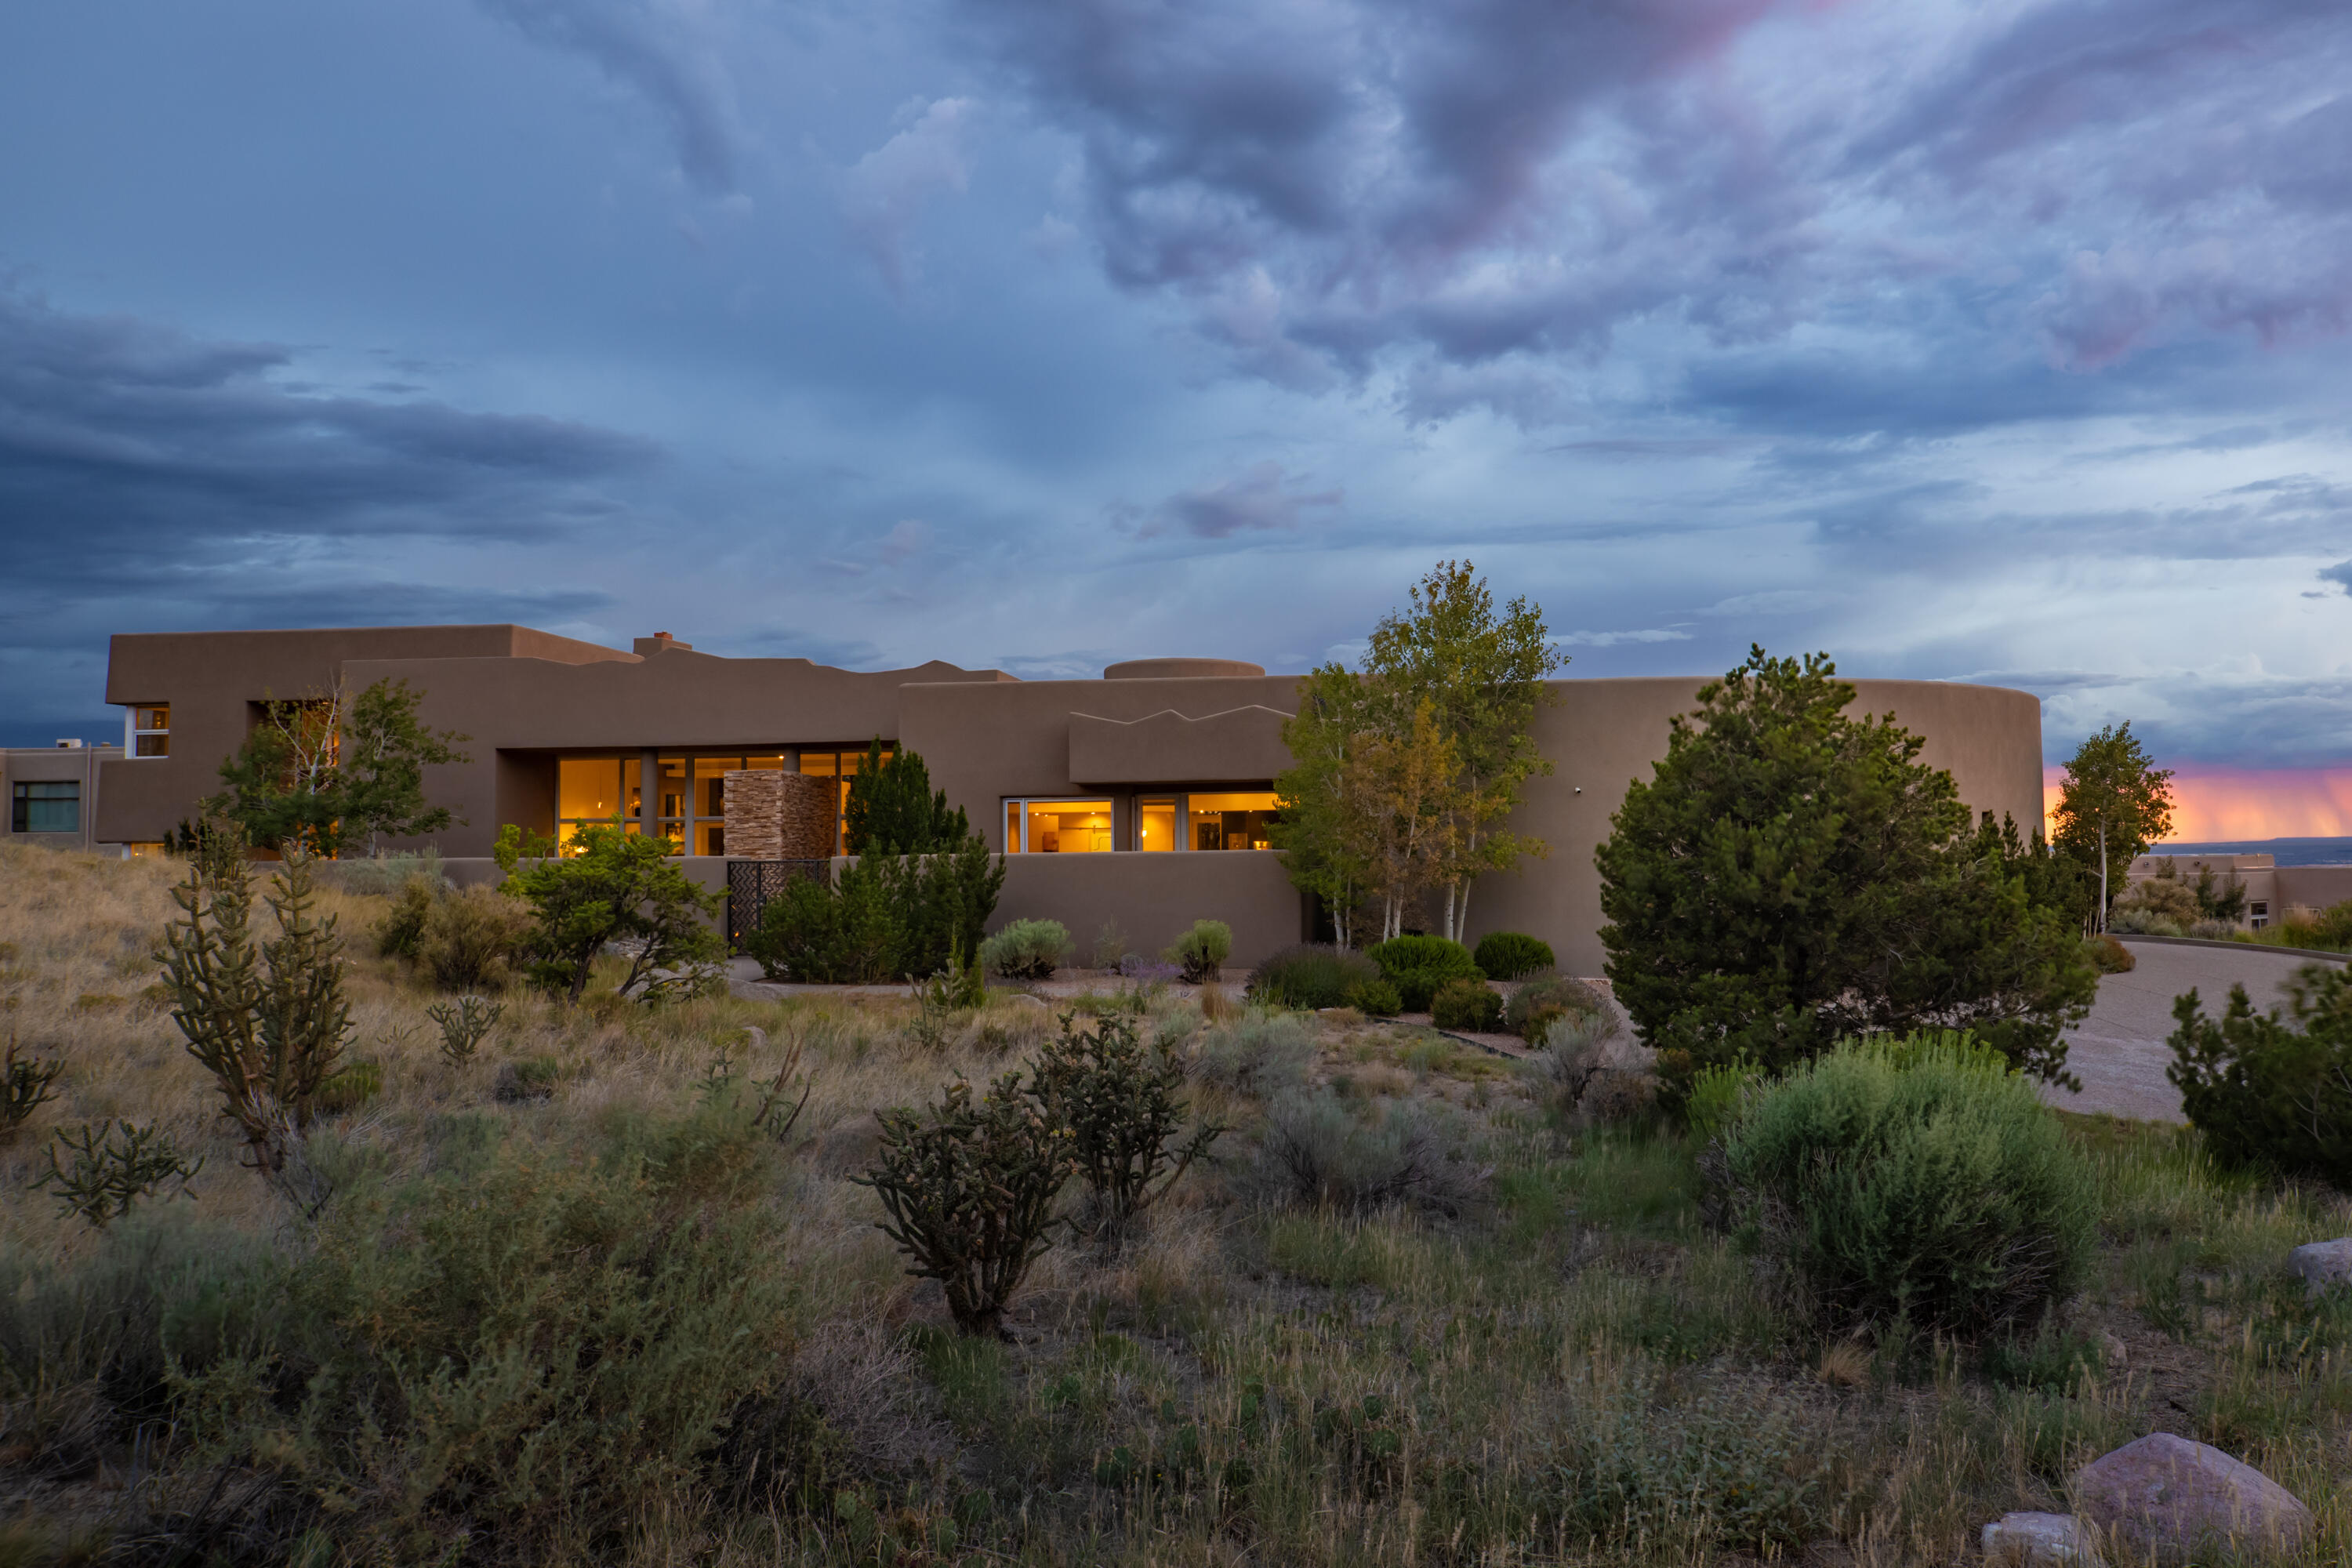 This dramatic homesite is located in a cul-de-sac near the Eastern most point of High Desert, only two lots away from the national forest, offering dynamic views in all directions and unparalleled privacy. Contemporary architecture, clean lines, and floor to ceiling windows allow the views to be the commanding presence. Beautiful high end contemporary finishes and attention to detail define this great home. The floor plan is well suited for a variety of situations with 2 primary suites, one on the main level, and one upstairs, and 2 additional bedrooms on the main level. Contemporary homes rarely enter the market in this location. Enjoy the best of the High Desert lifestyle from this great home with access to hiking, biking and walking trails immediately outside your door.